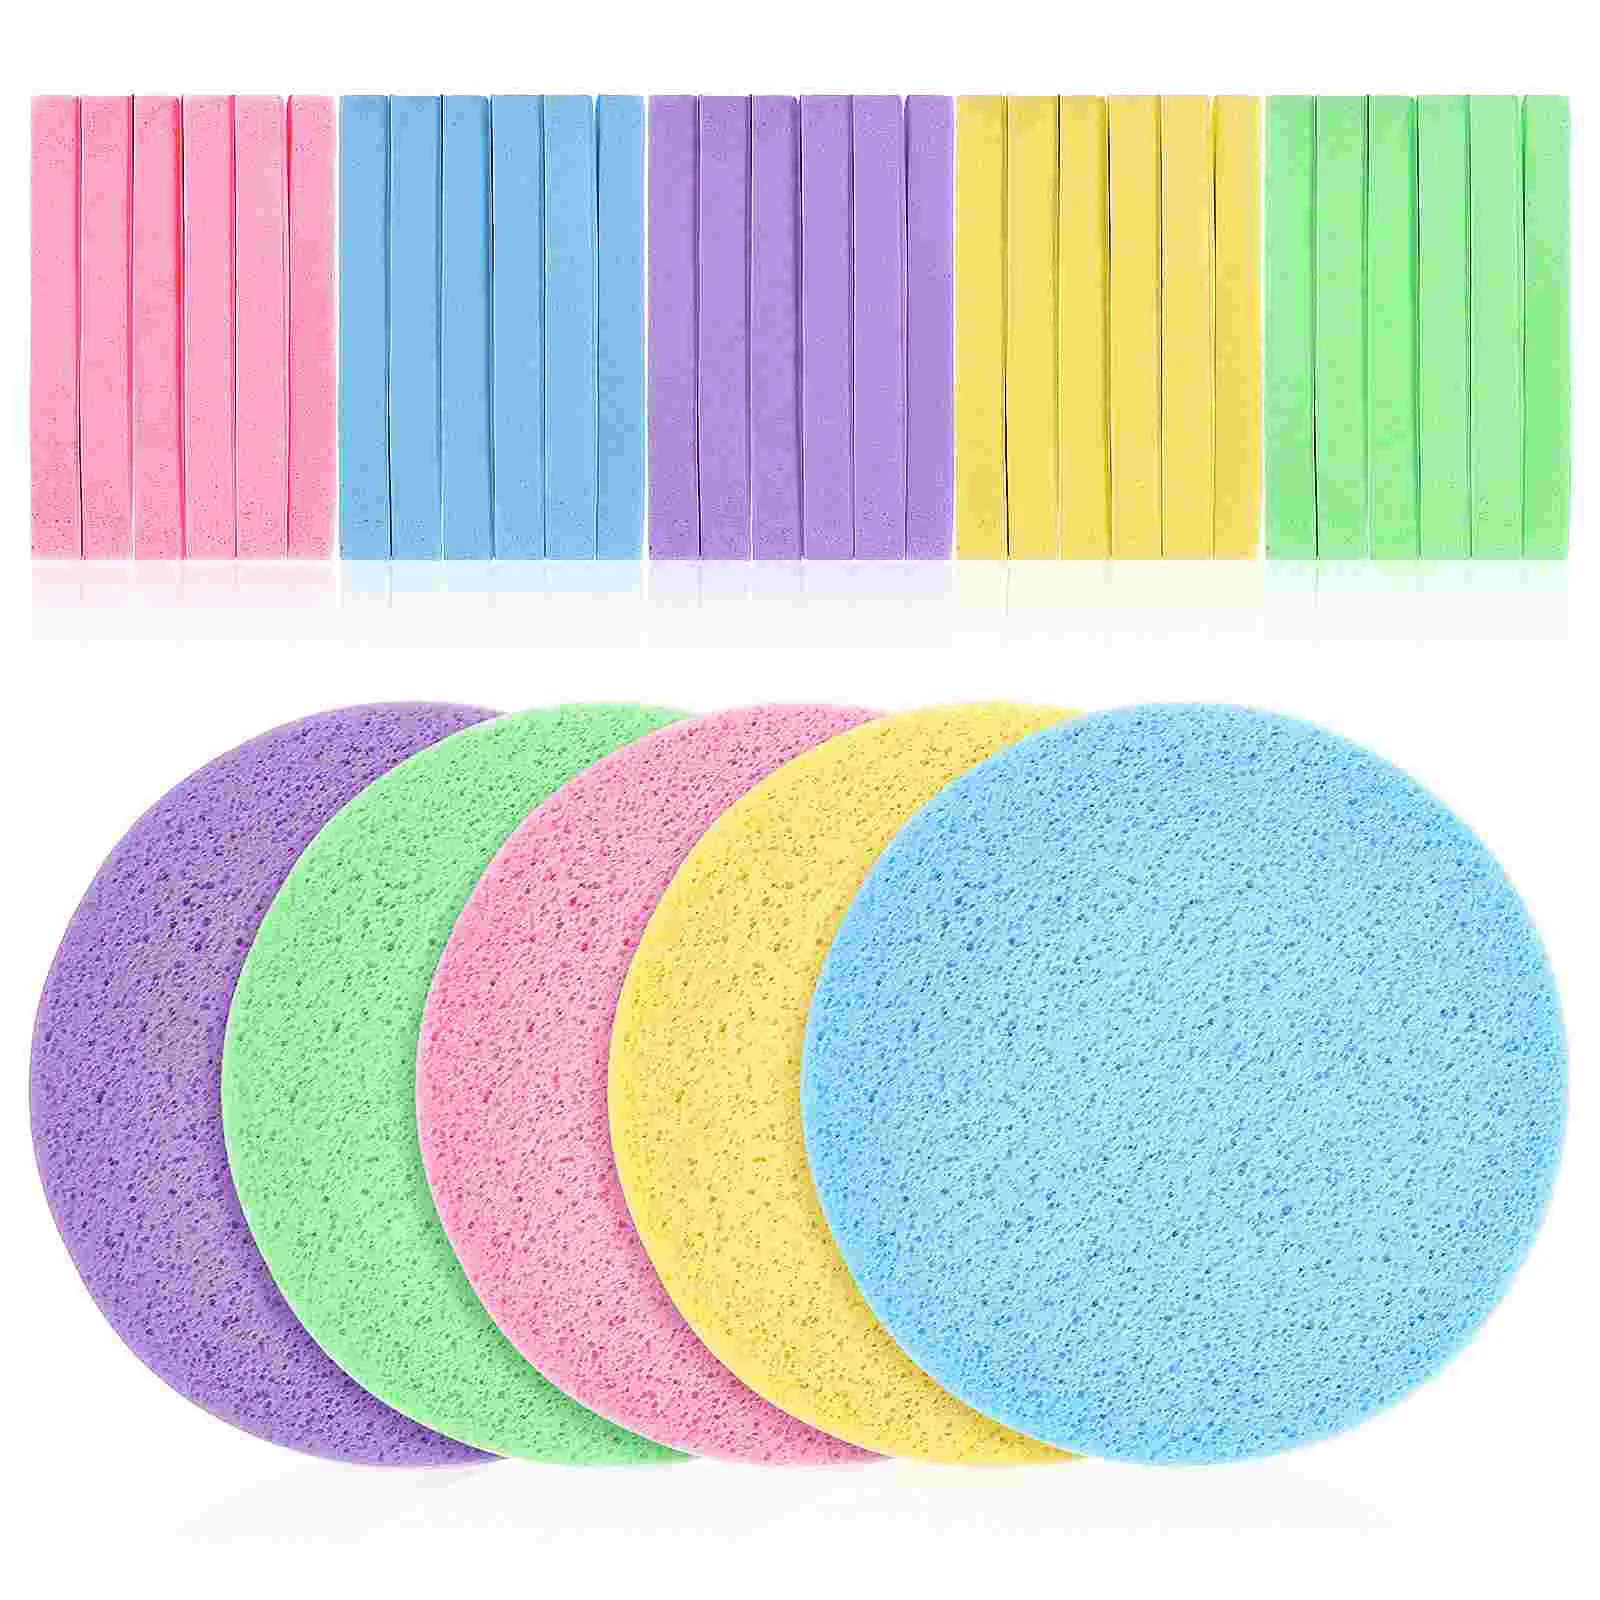 

Facial Sponge Exfoliating Removal Face Cleansing Makeup Supplies Washing Esthetician Compressed Sponges Round Cosmetics